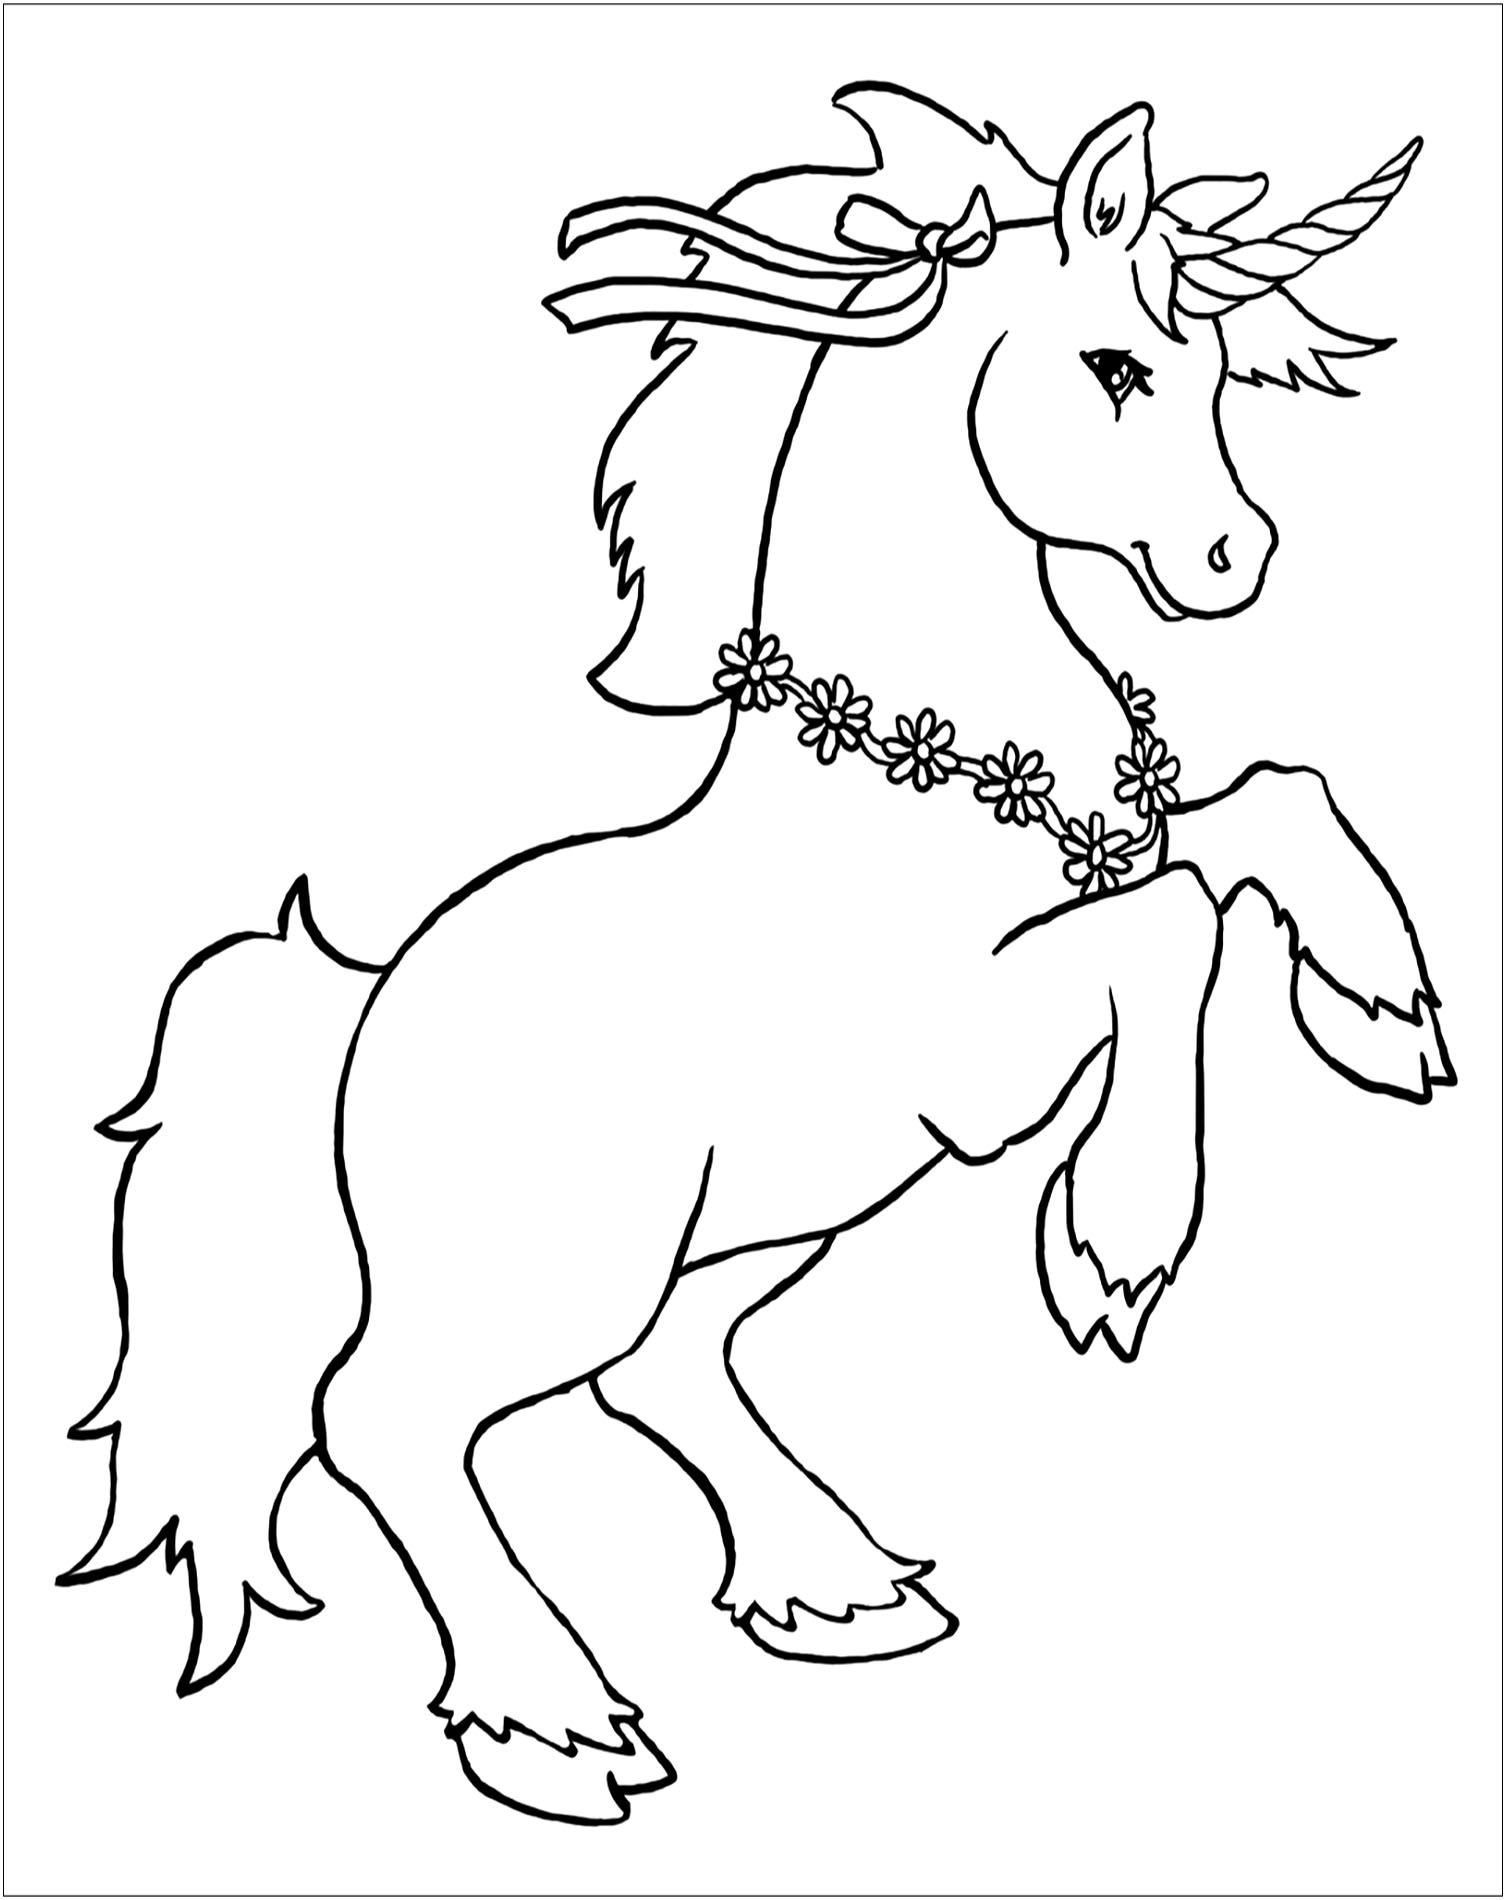 Easy unicorn coloring pages for kids